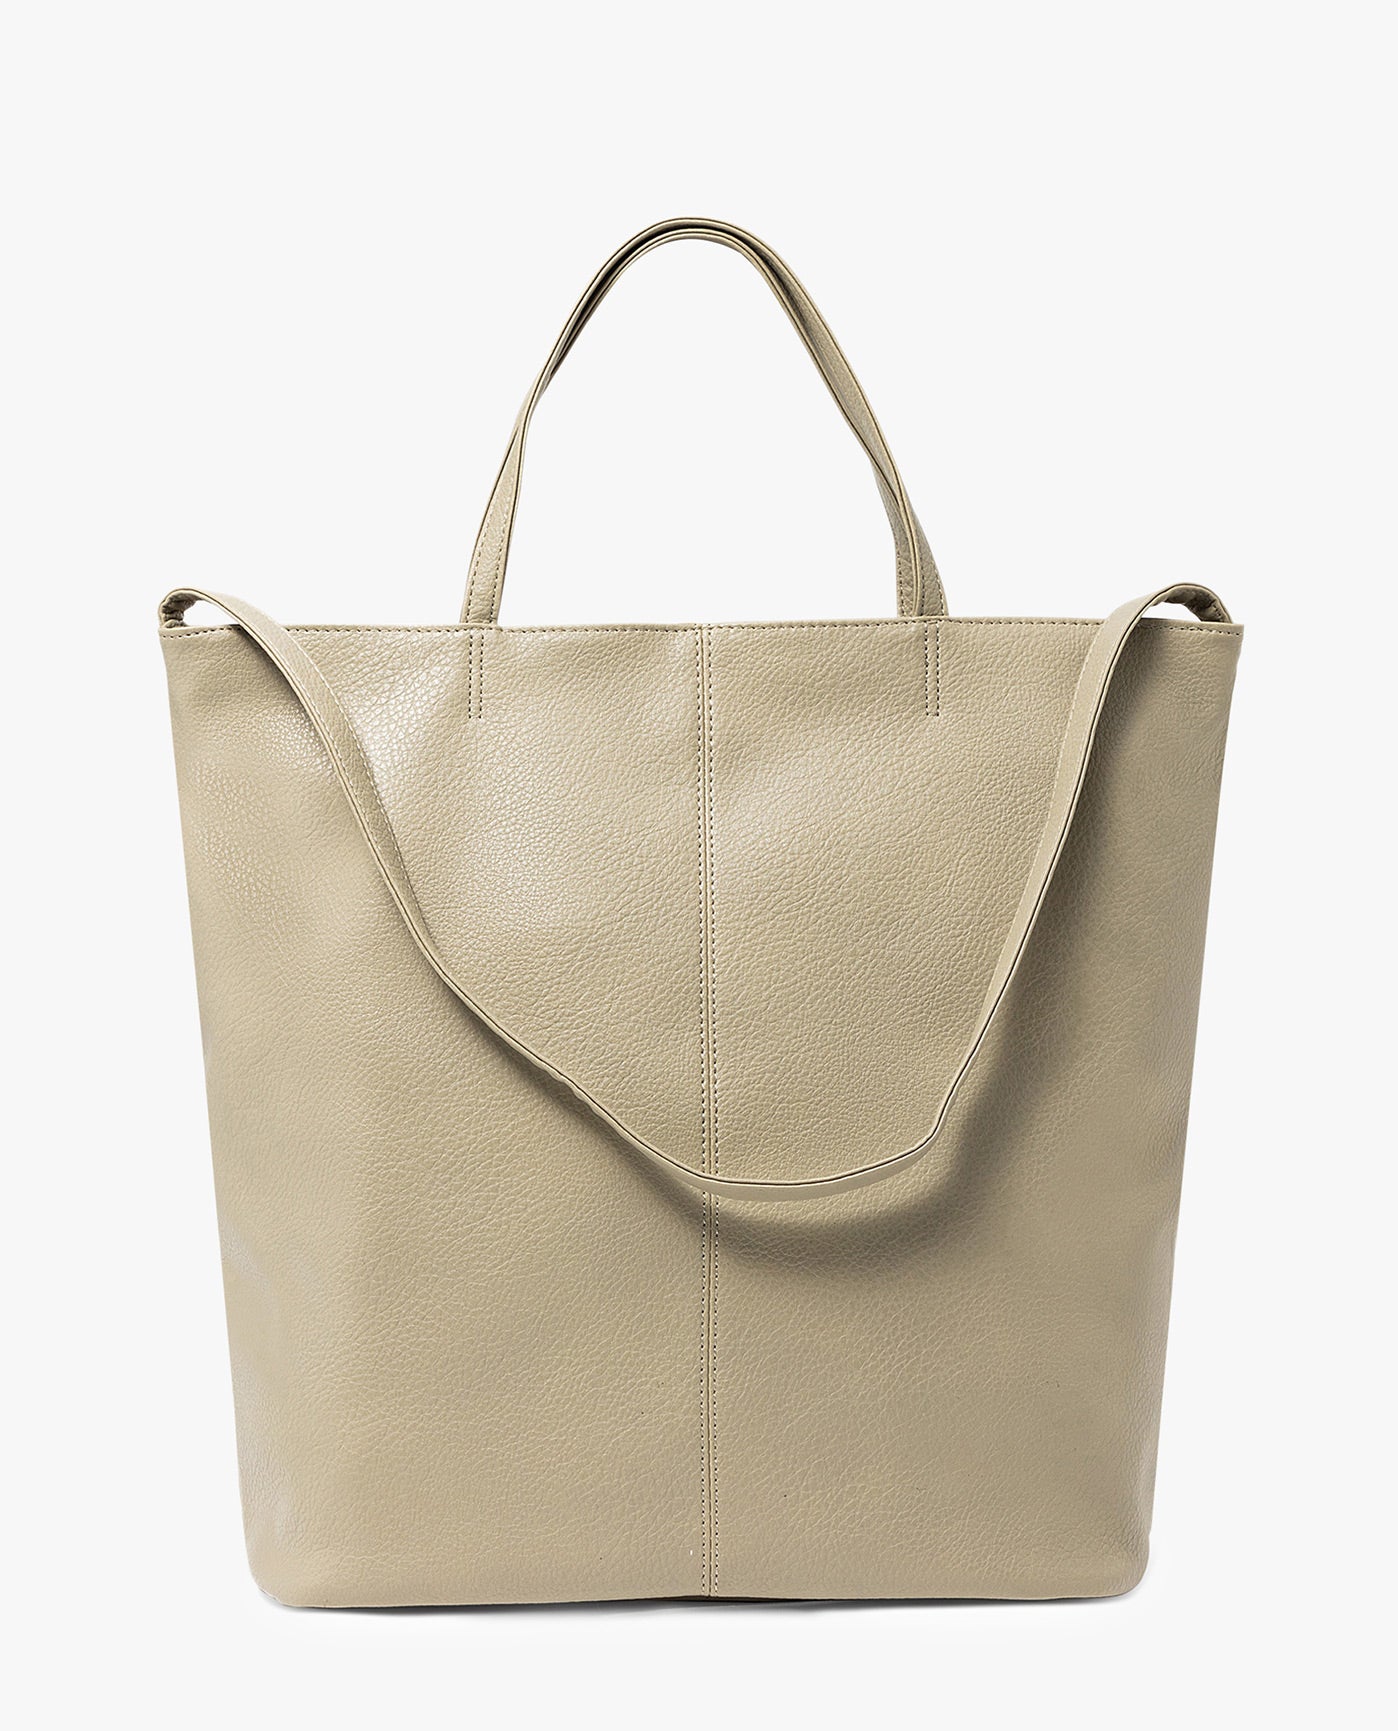 LAURA LARGE TOTE